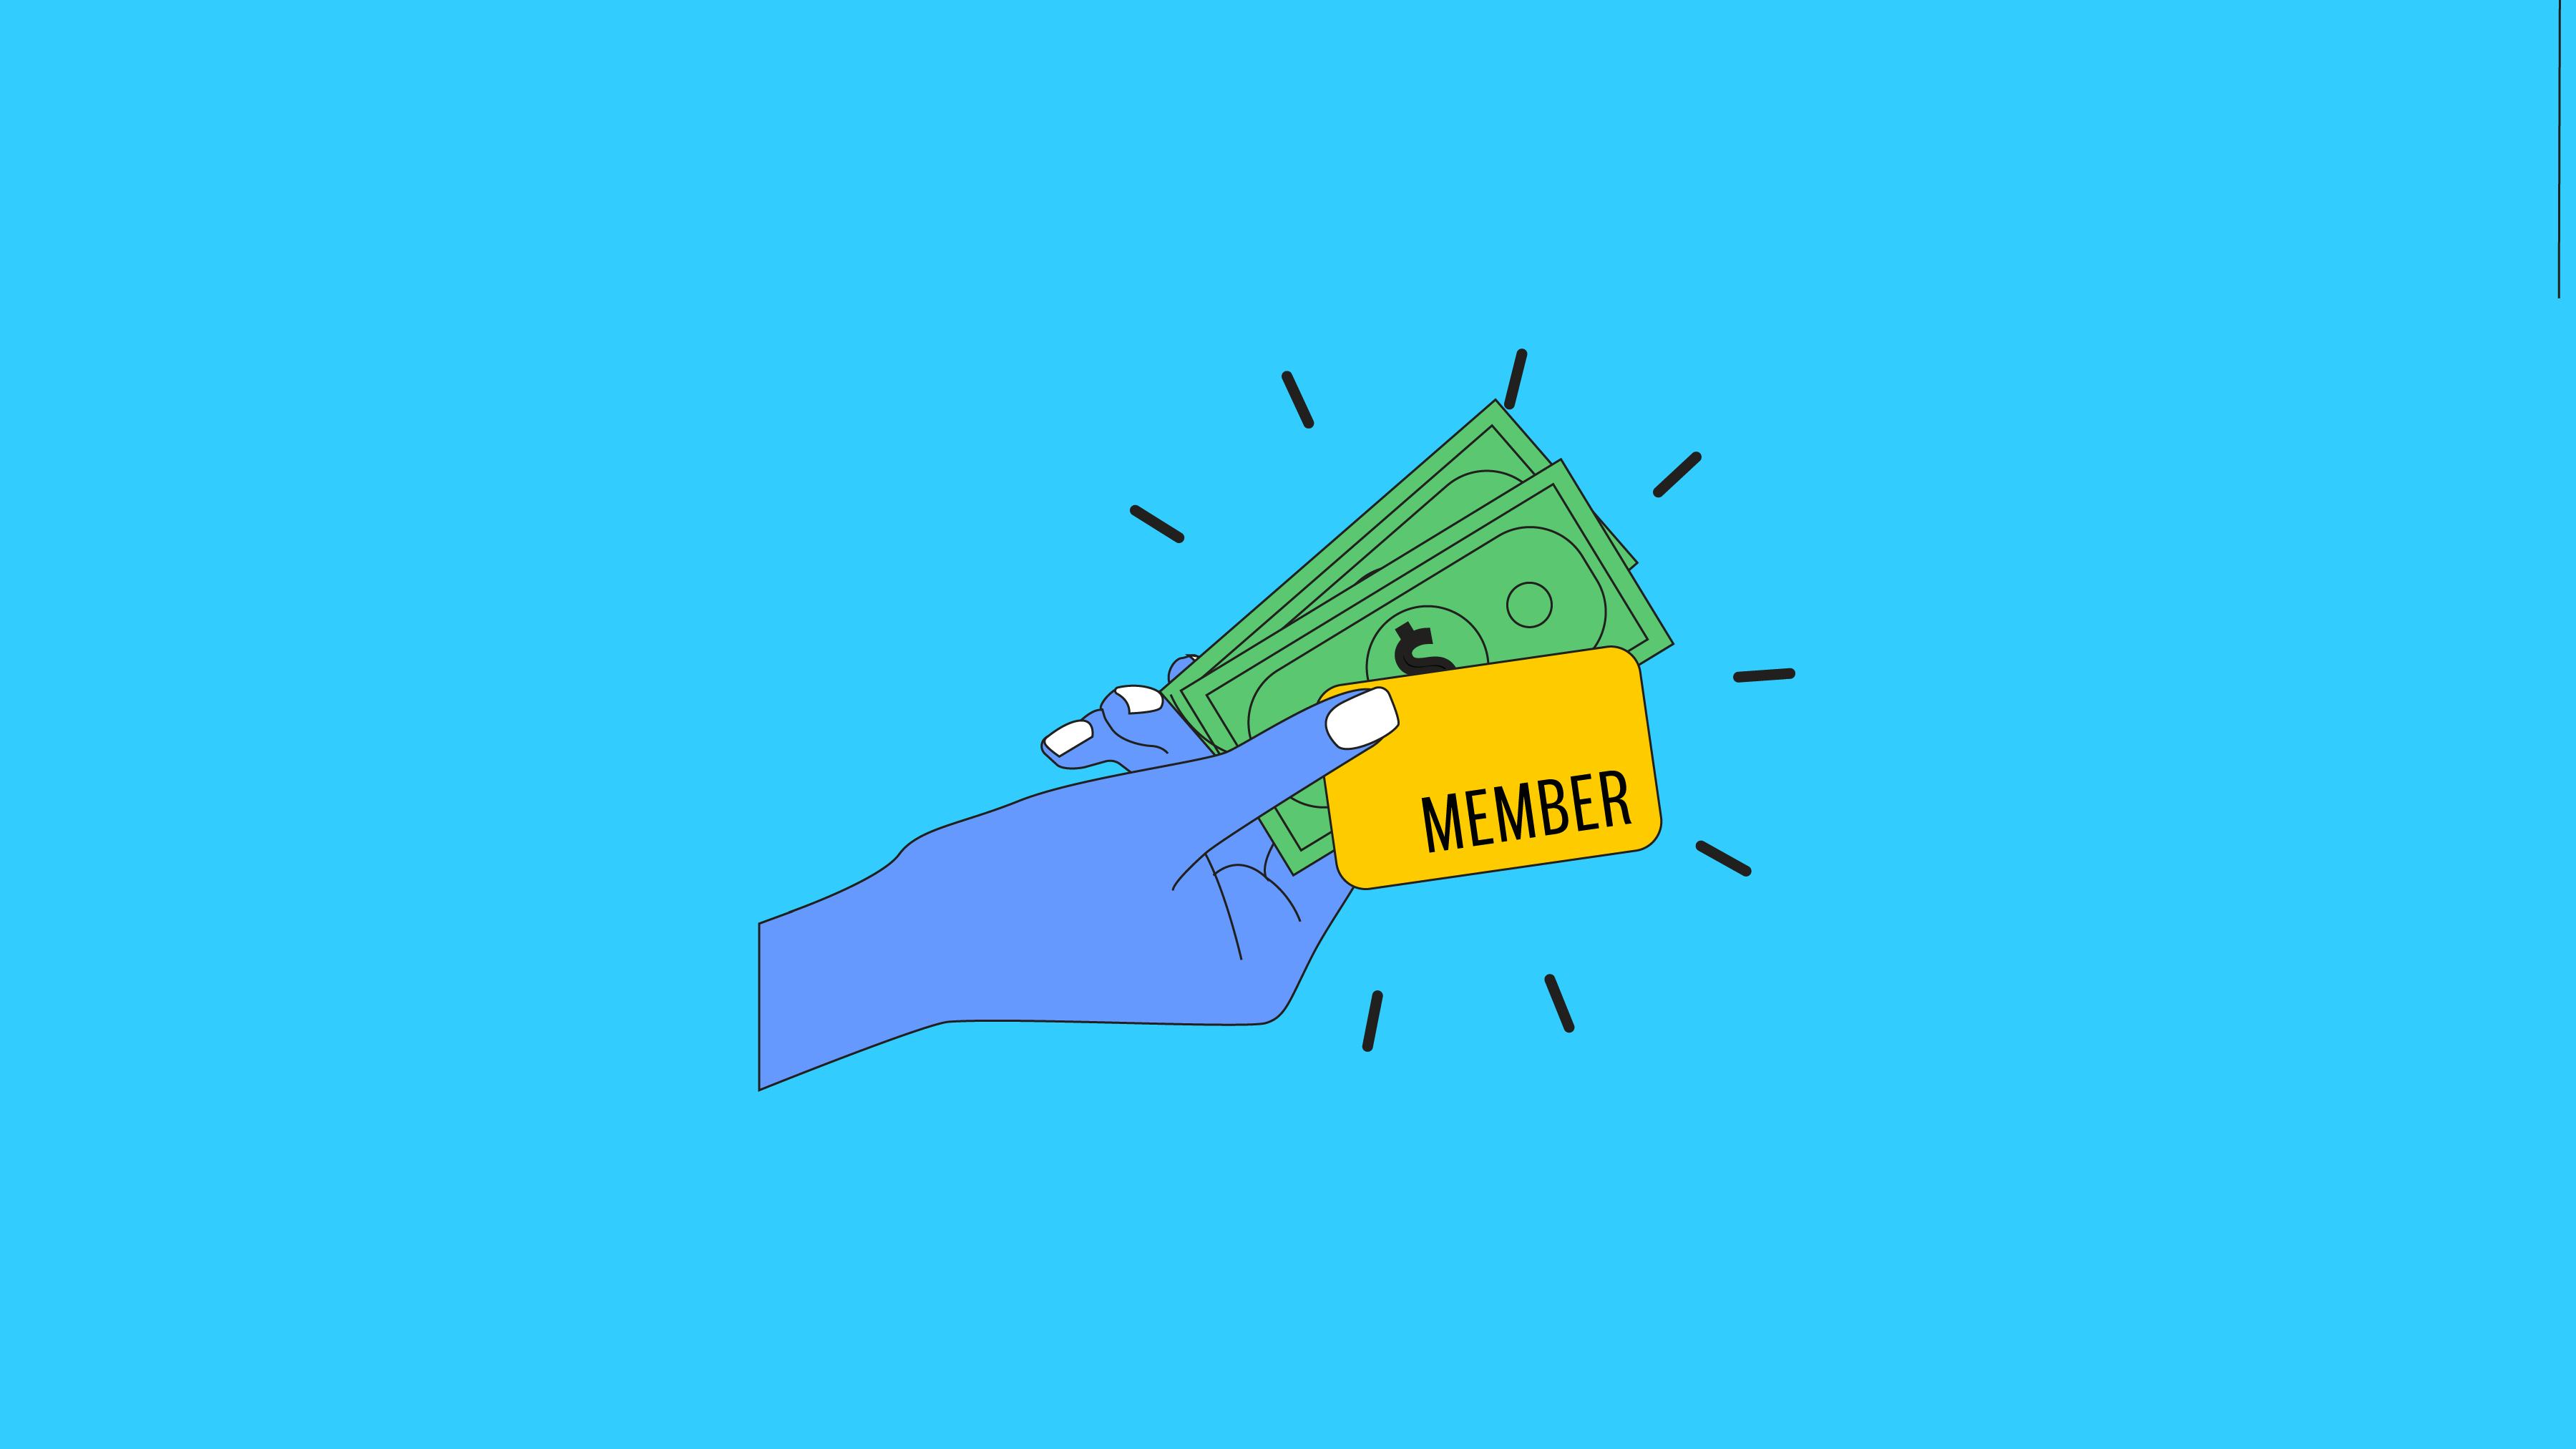 How to Set Up Club Finances: Collecting Money and Club Membership Fees Online